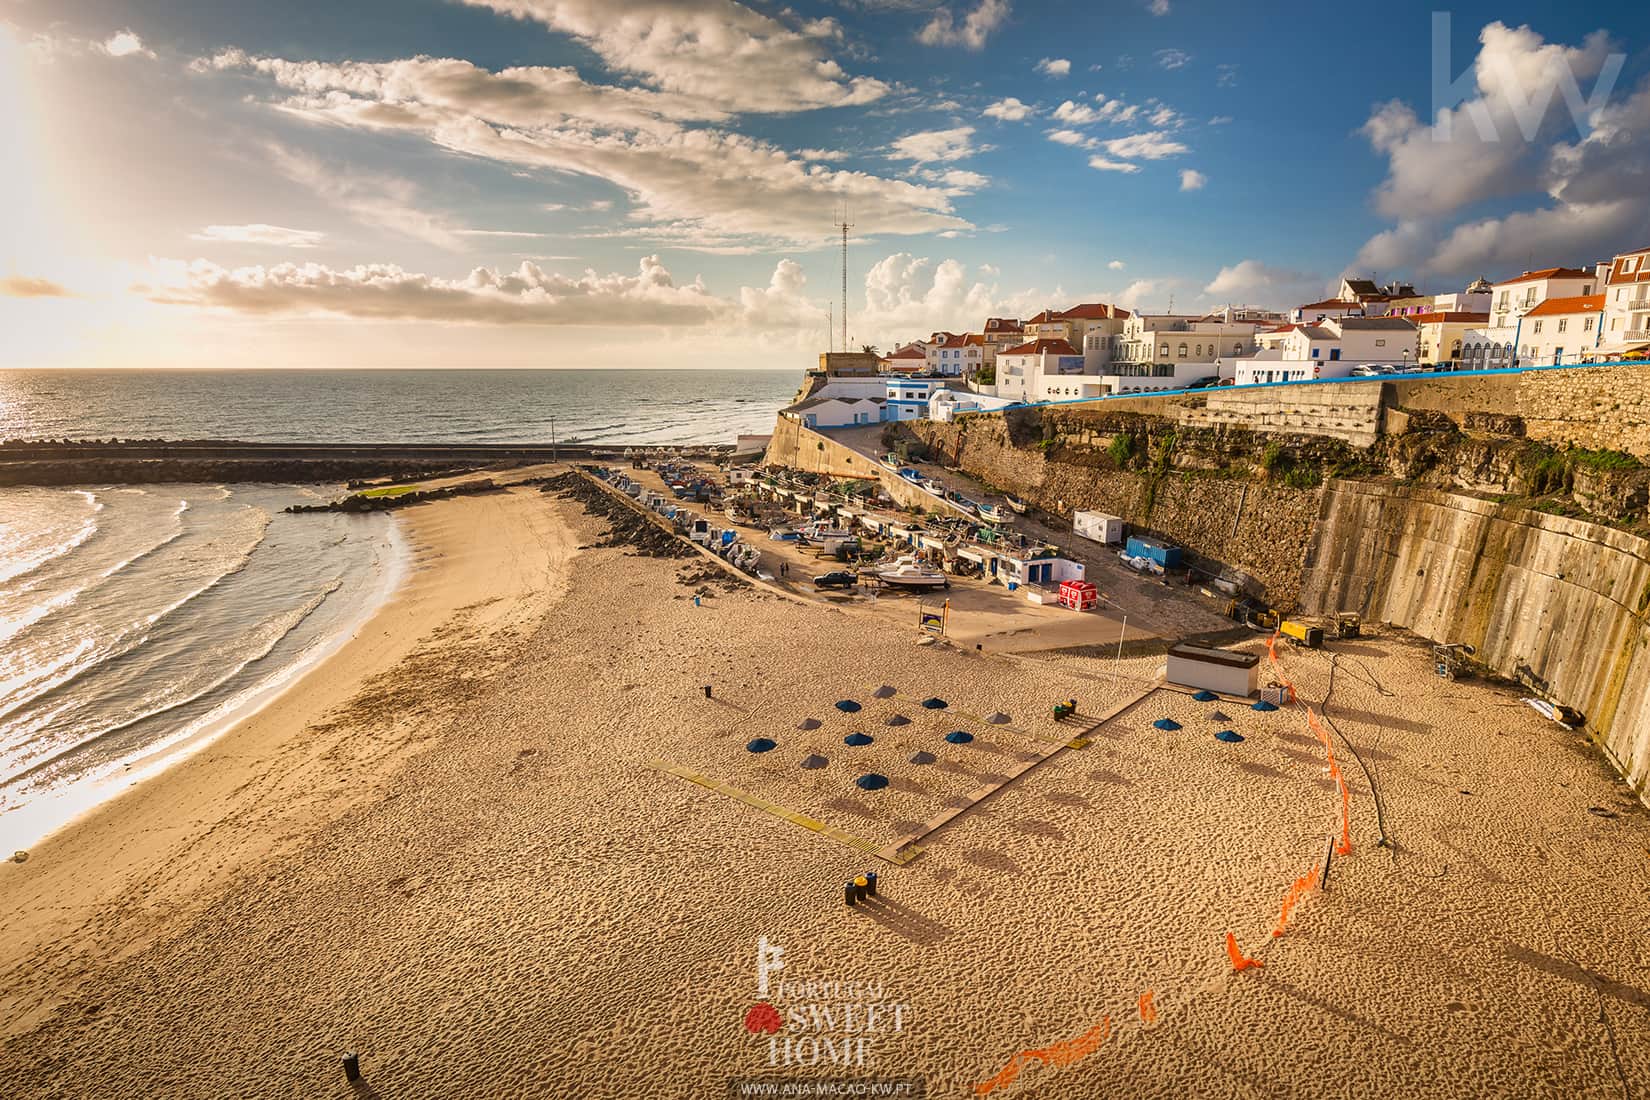 Ericeira, the Capital of Surfing in Portugal, 15 minutes by car